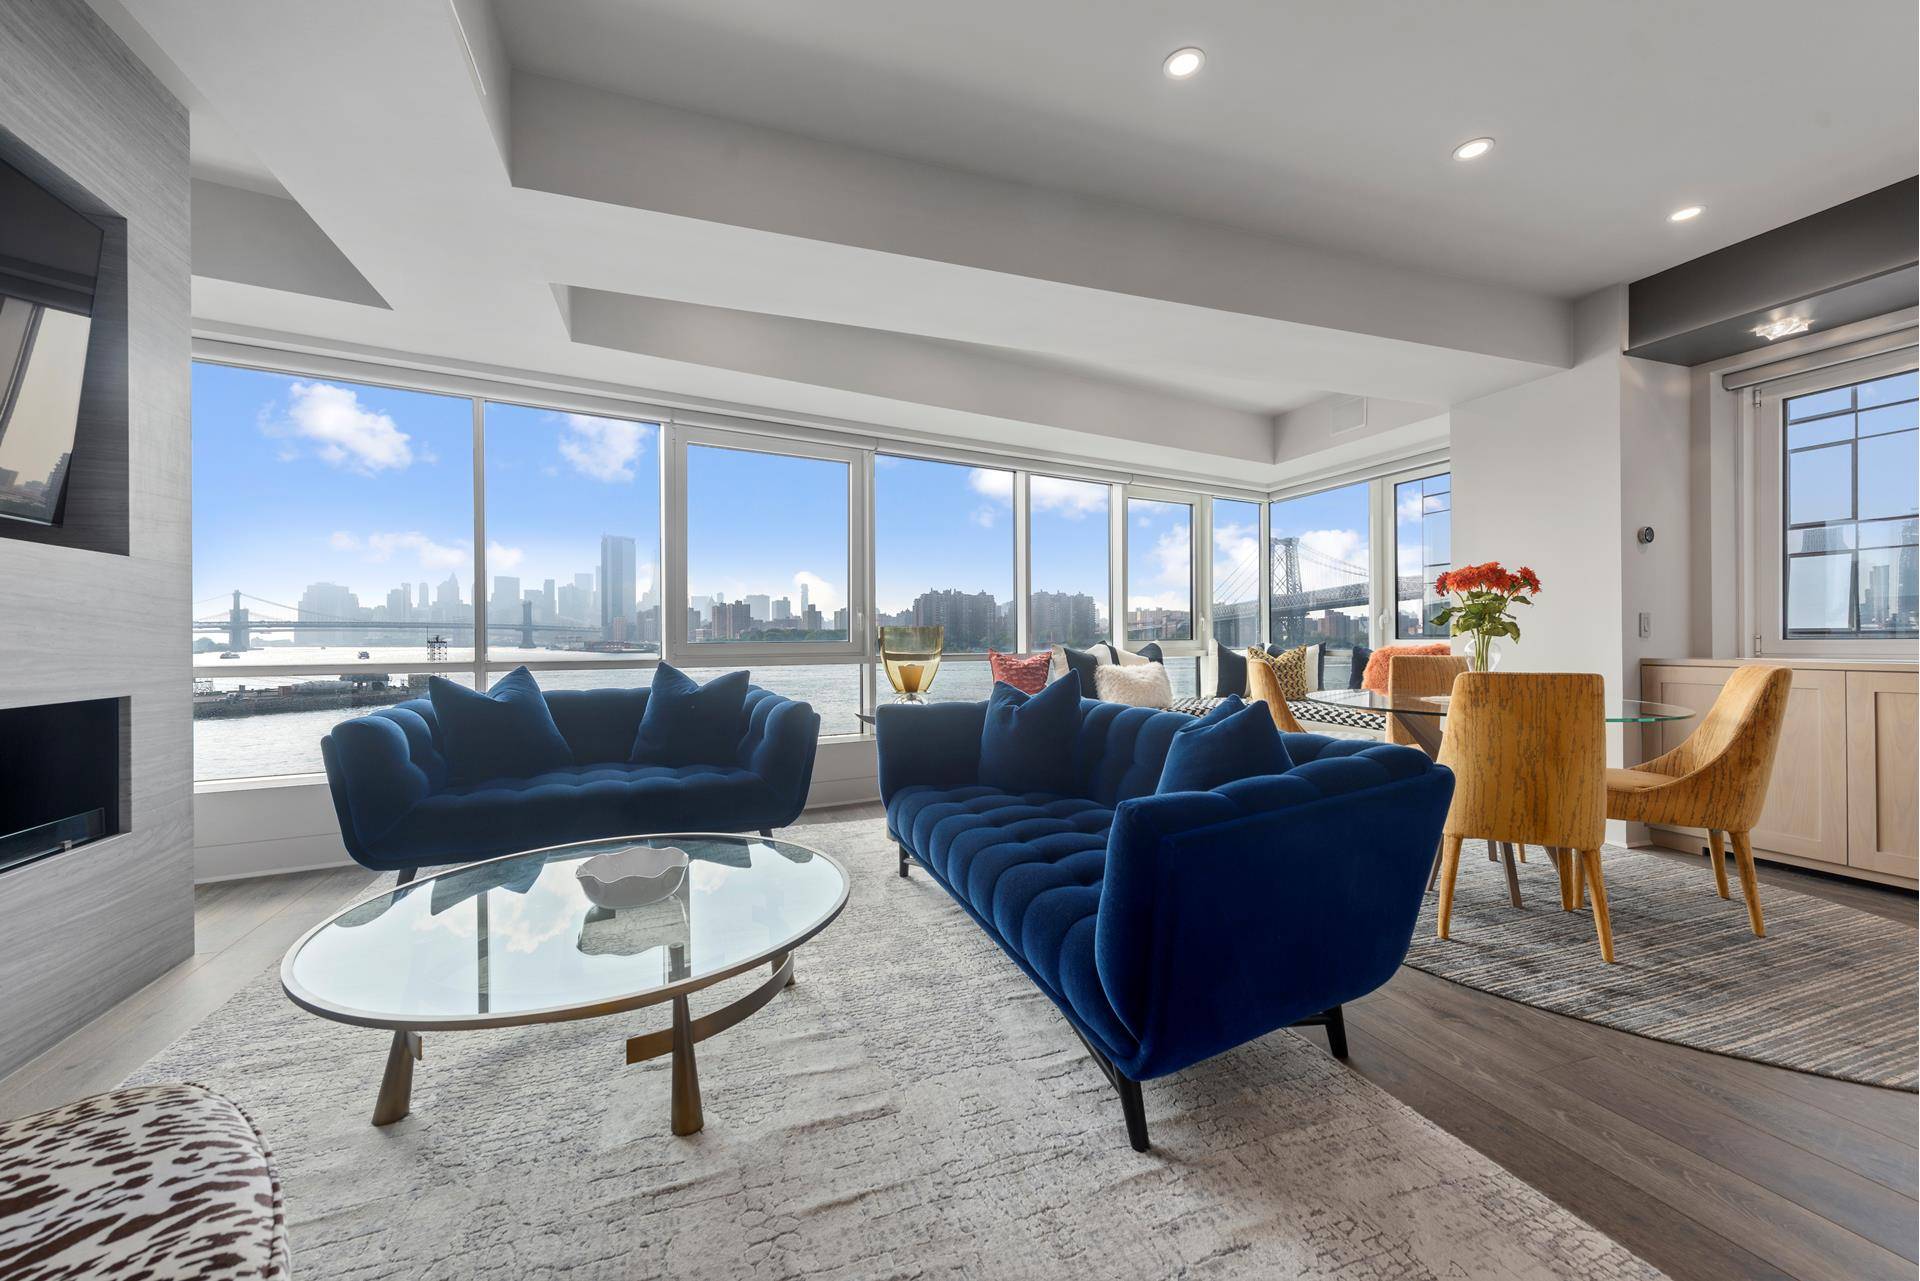 Welcome home to the serenity and elegance of the Williamsburg waterfront.